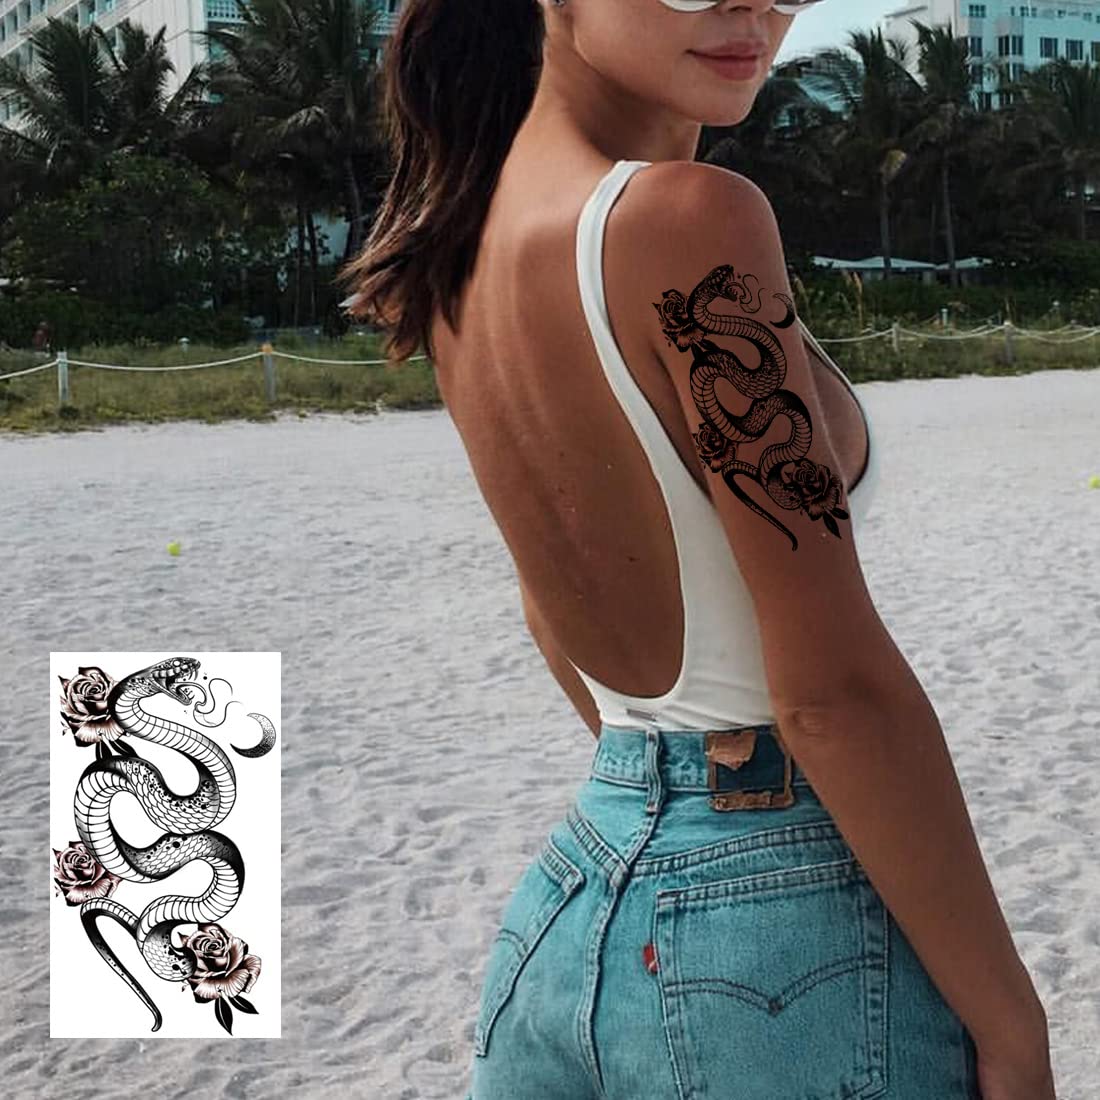 Ooopsiun 12 Large Sheets Snake Temporary Tattoos For Men Women, Cool Waterproof Body Fake Tattoo Sticker for Aldult 3D Cobra Mamba Viper Arm Tattoos